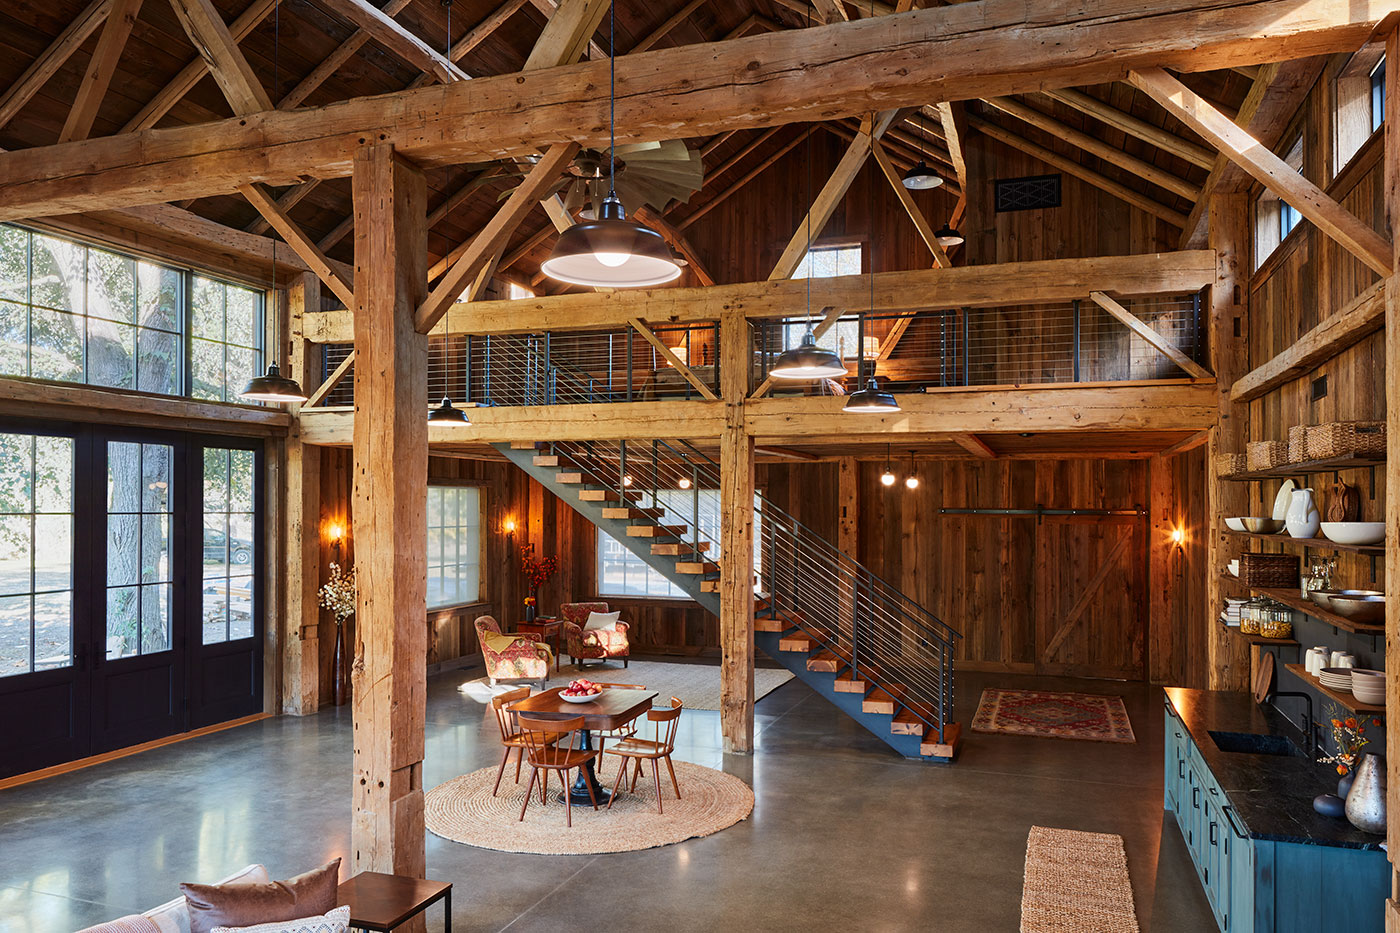 Use of exposed beams by Catherine Truman Architects